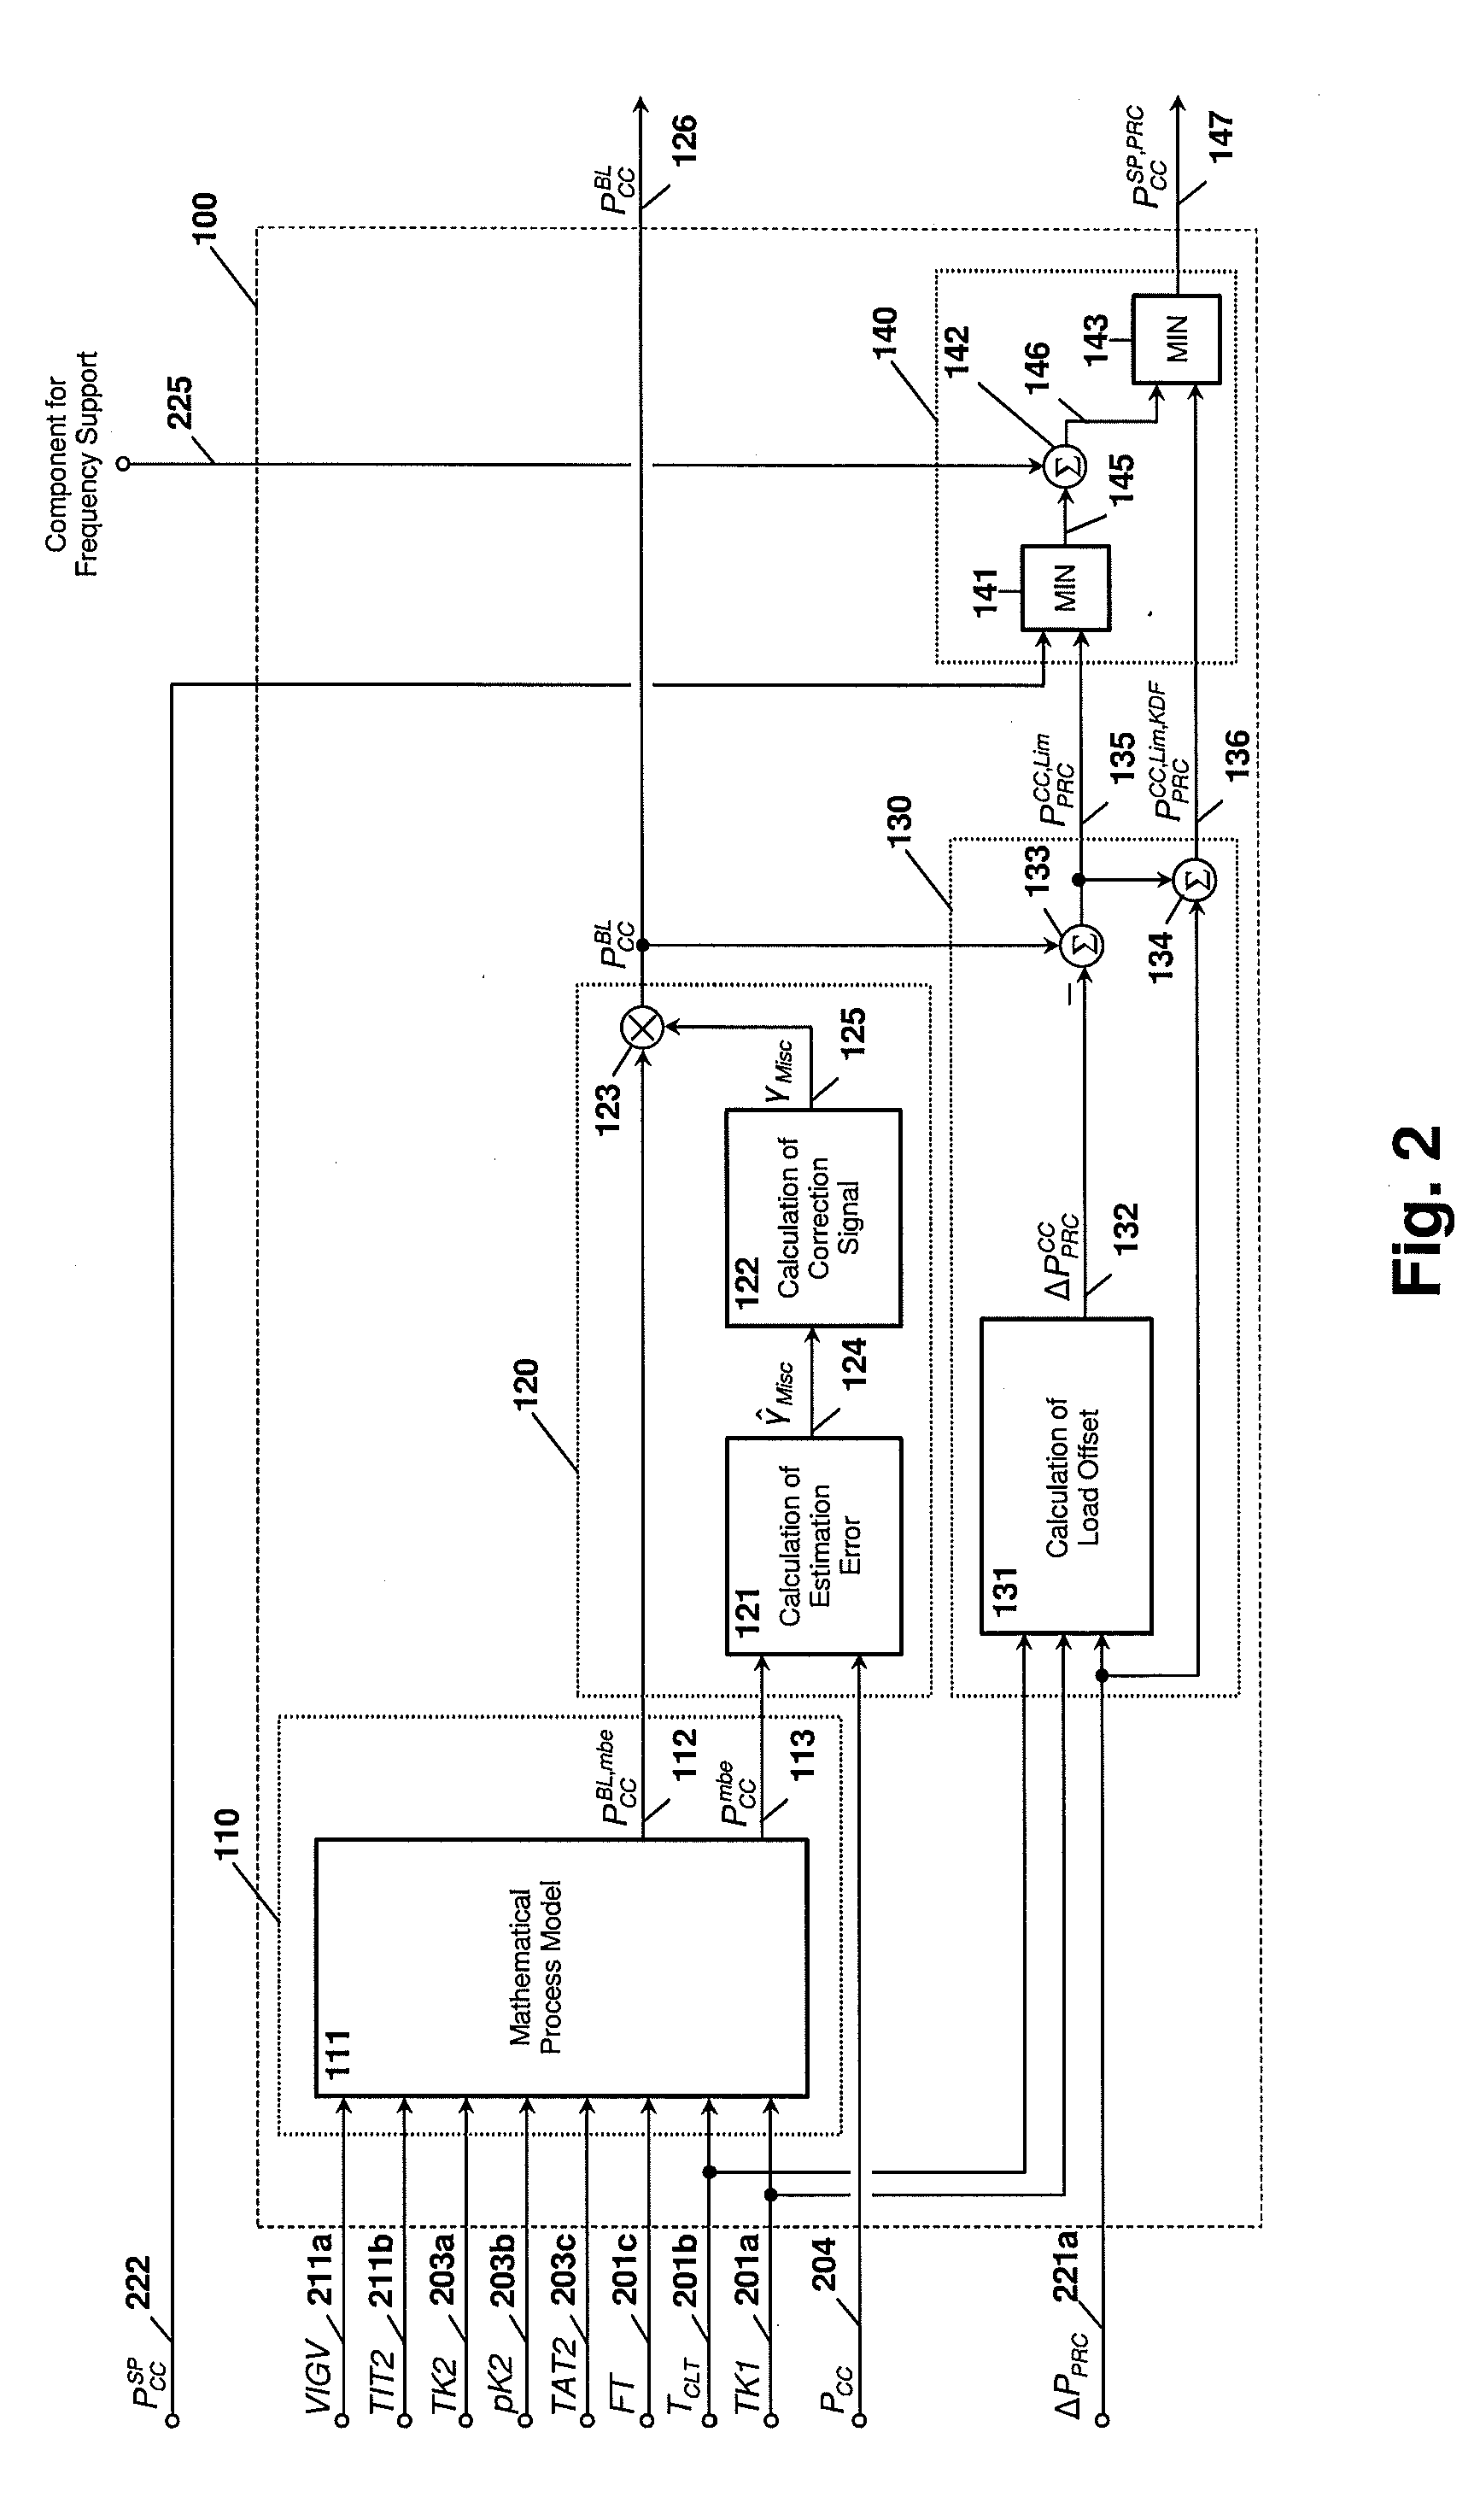 Method of estimating the maximum power generation capacity and for controlling a specified power reserve of a single cycle or combined cycle gas turbine power plant, and a power generating system for use with said method